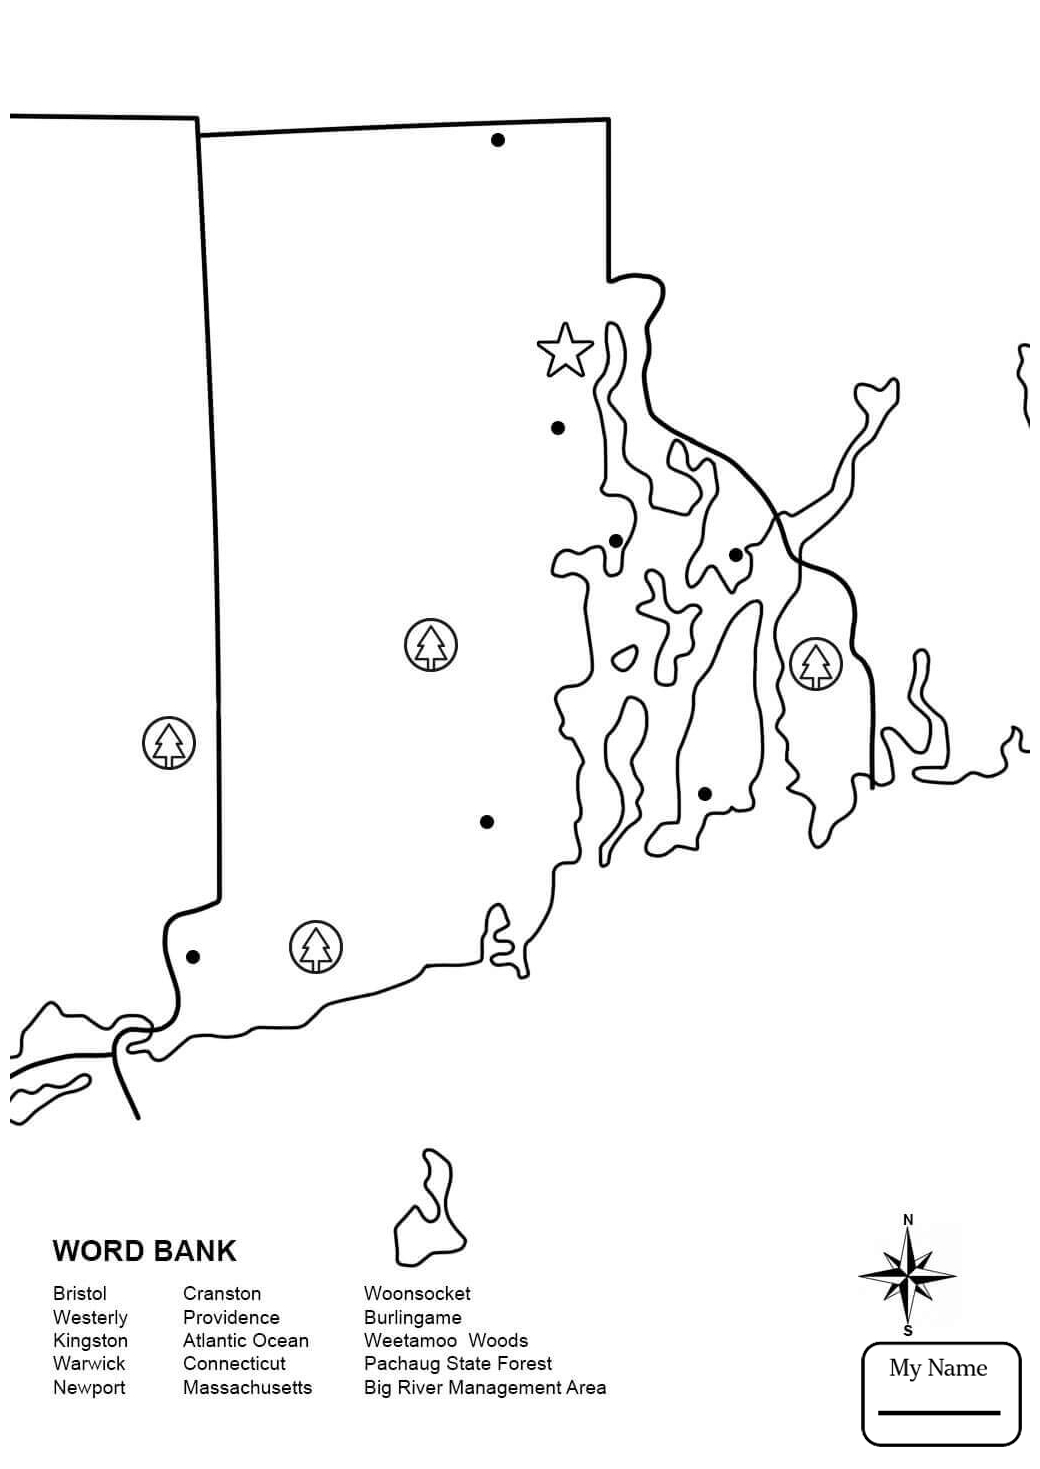 Countries Coloring Pages Rhode Island Coloring Pages At Getdrawings Free For Personal